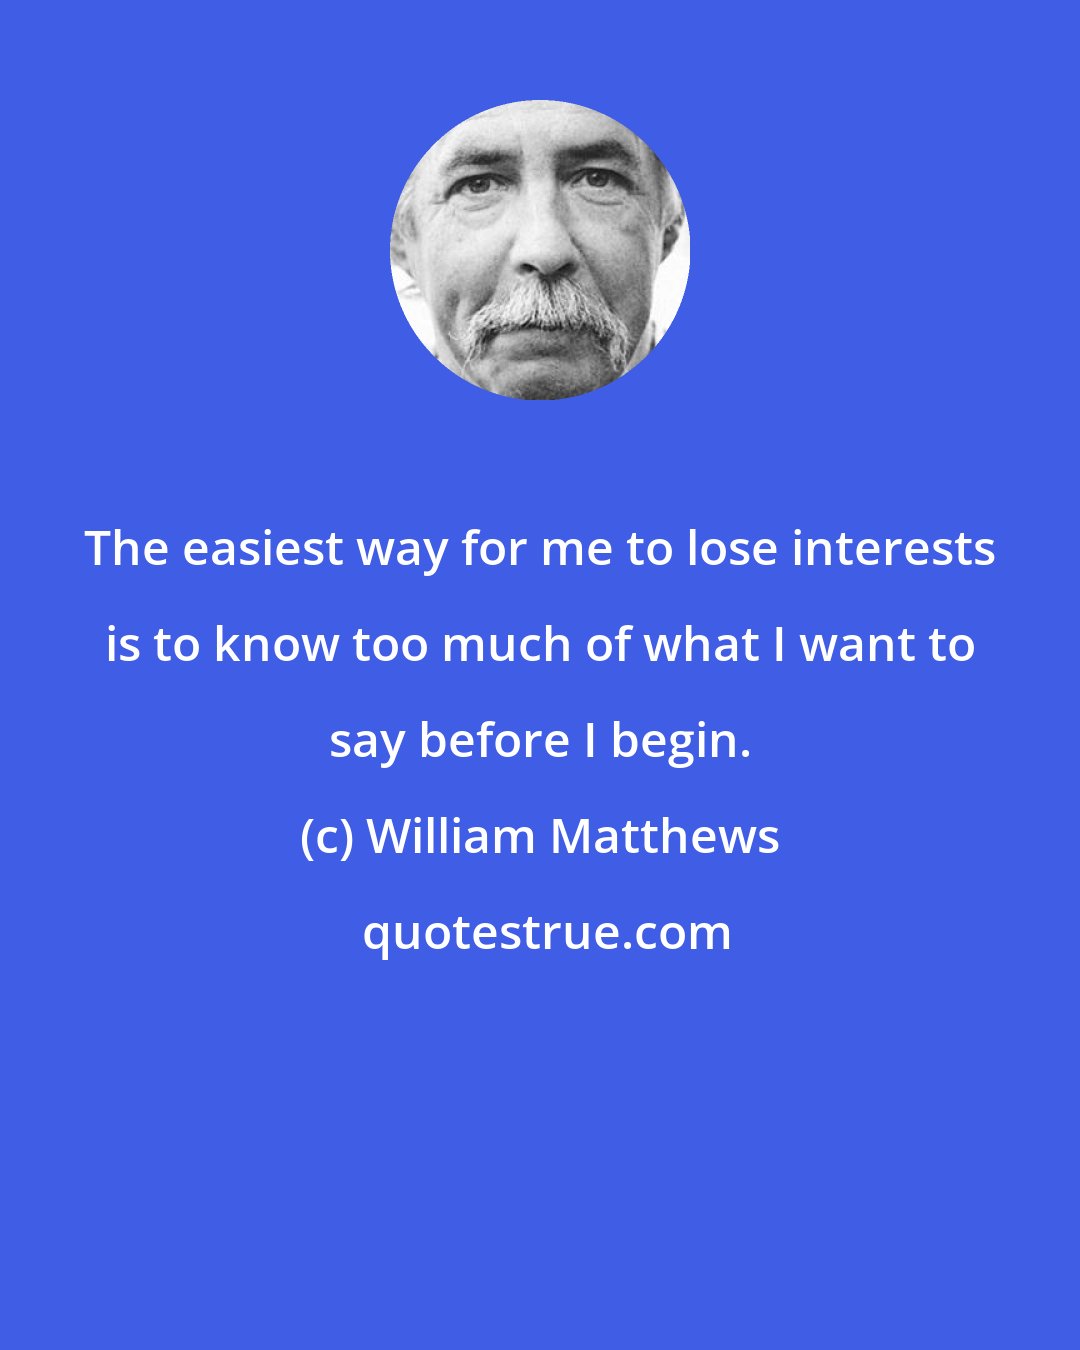 William Matthews: The easiest way for me to lose interests is to know too much of what I want to say before I begin.